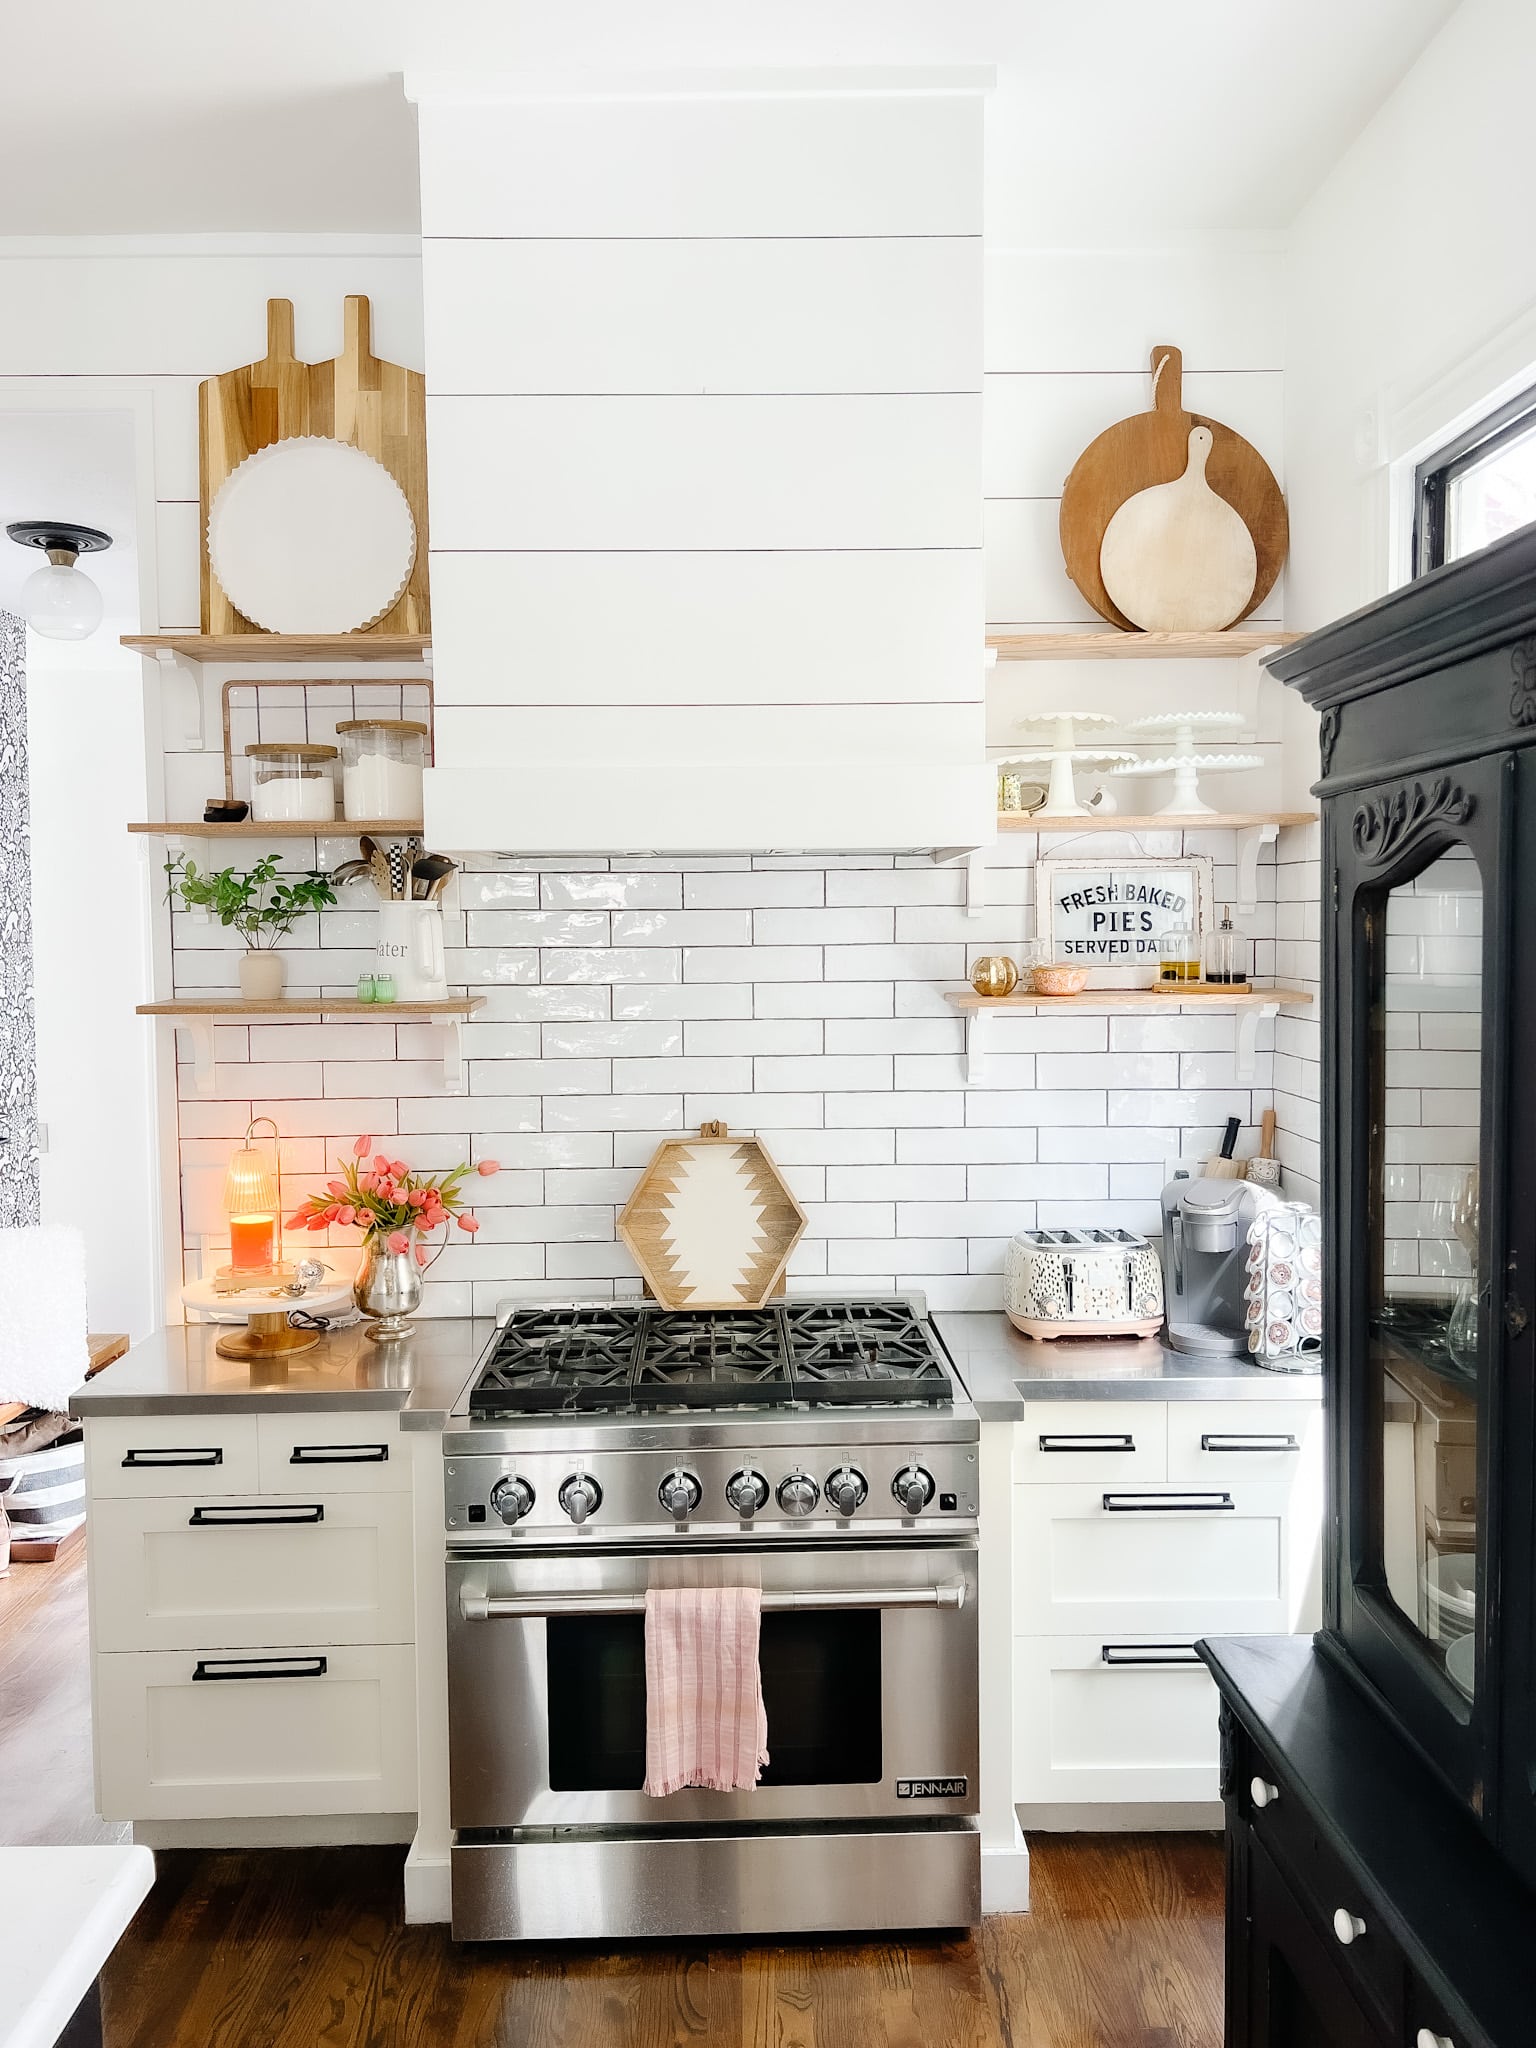 Update a Dated 90's Kitchen on a Budget. Bring your kitchen into the new century with these classic ways to refresh! 